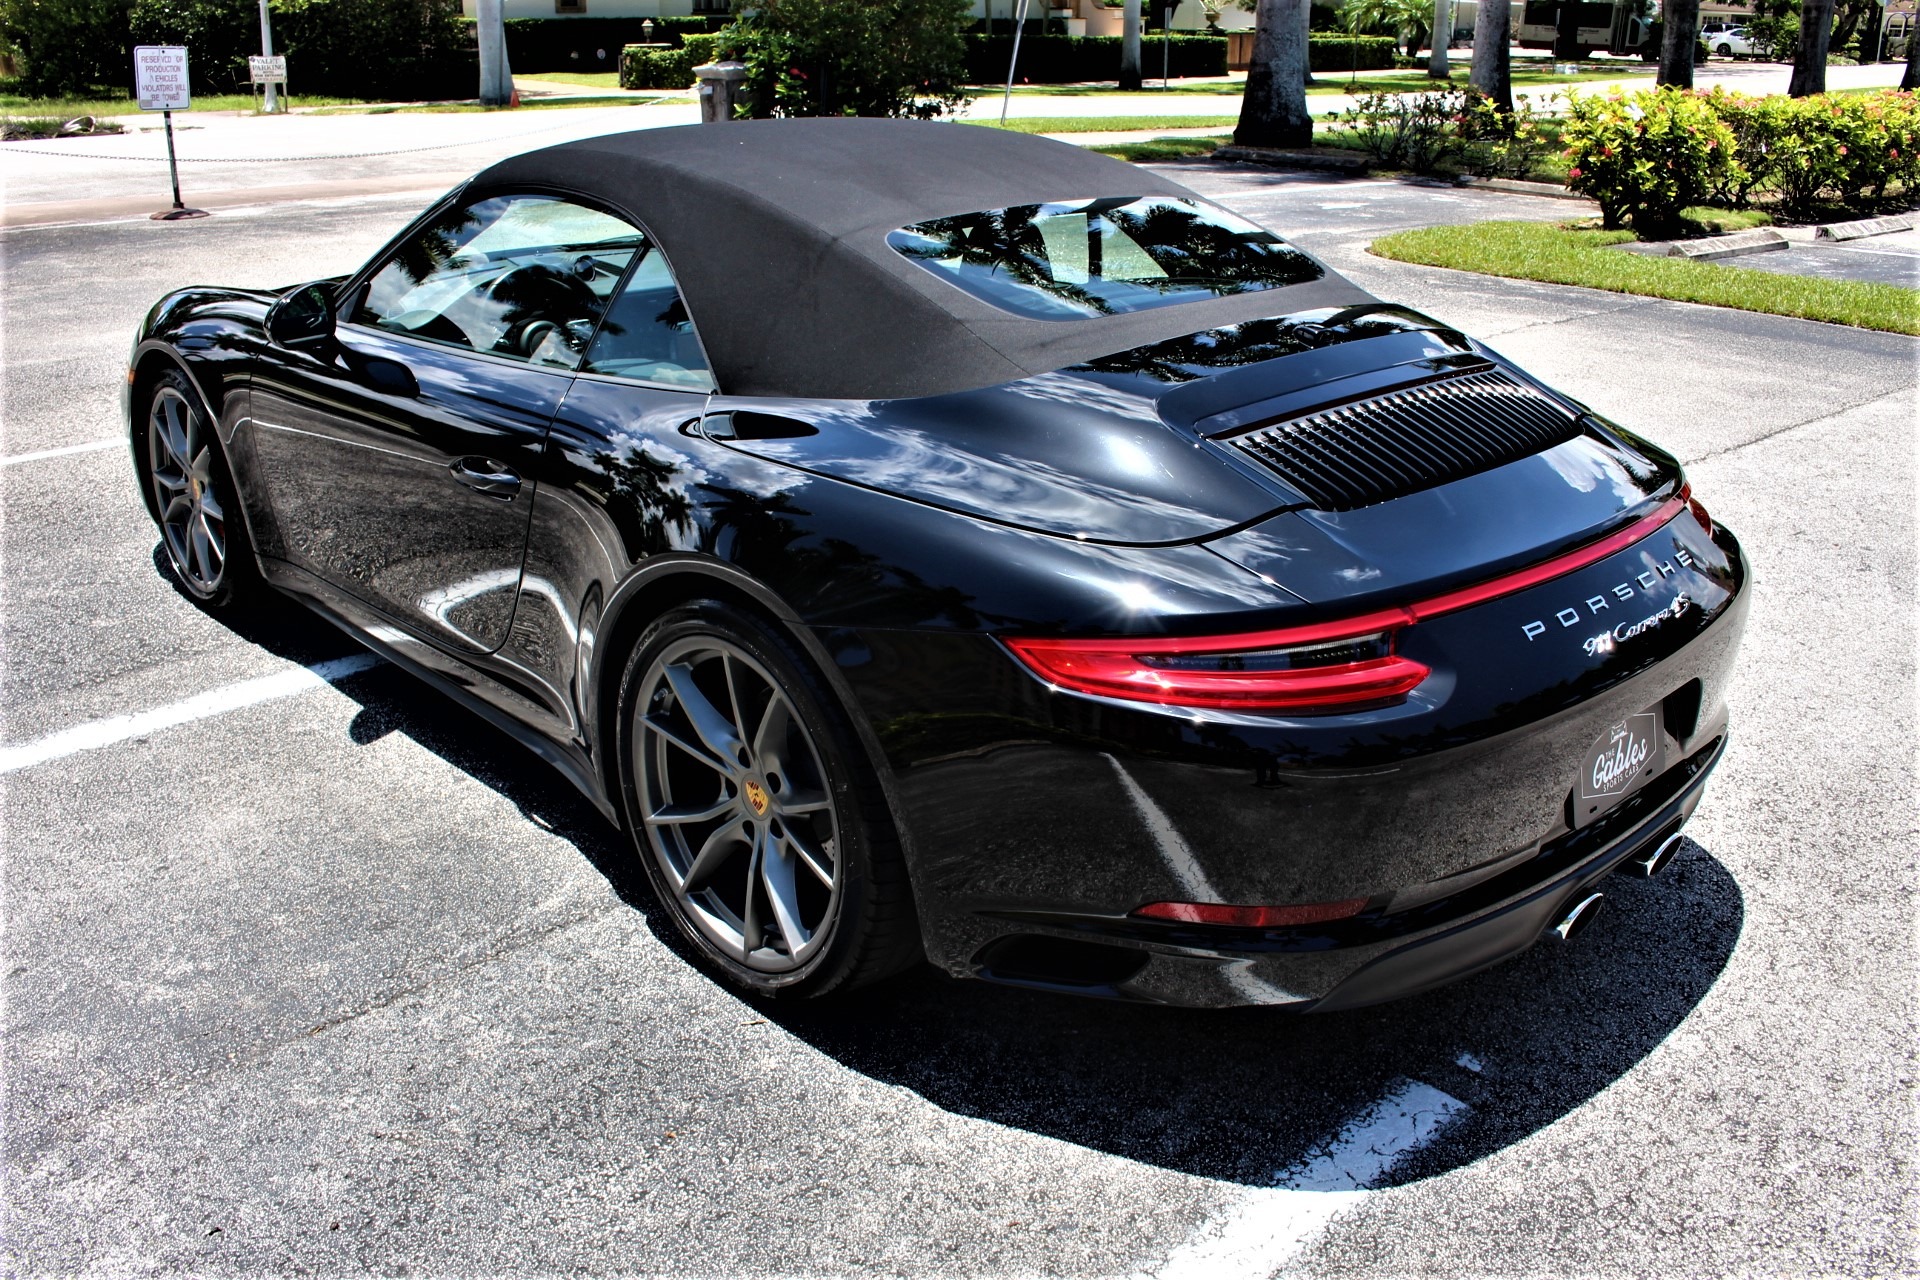 Used 2017 Porsche 911 Carrera 4S for sale Sold at The Gables Sports Cars in Miami FL 33146 2